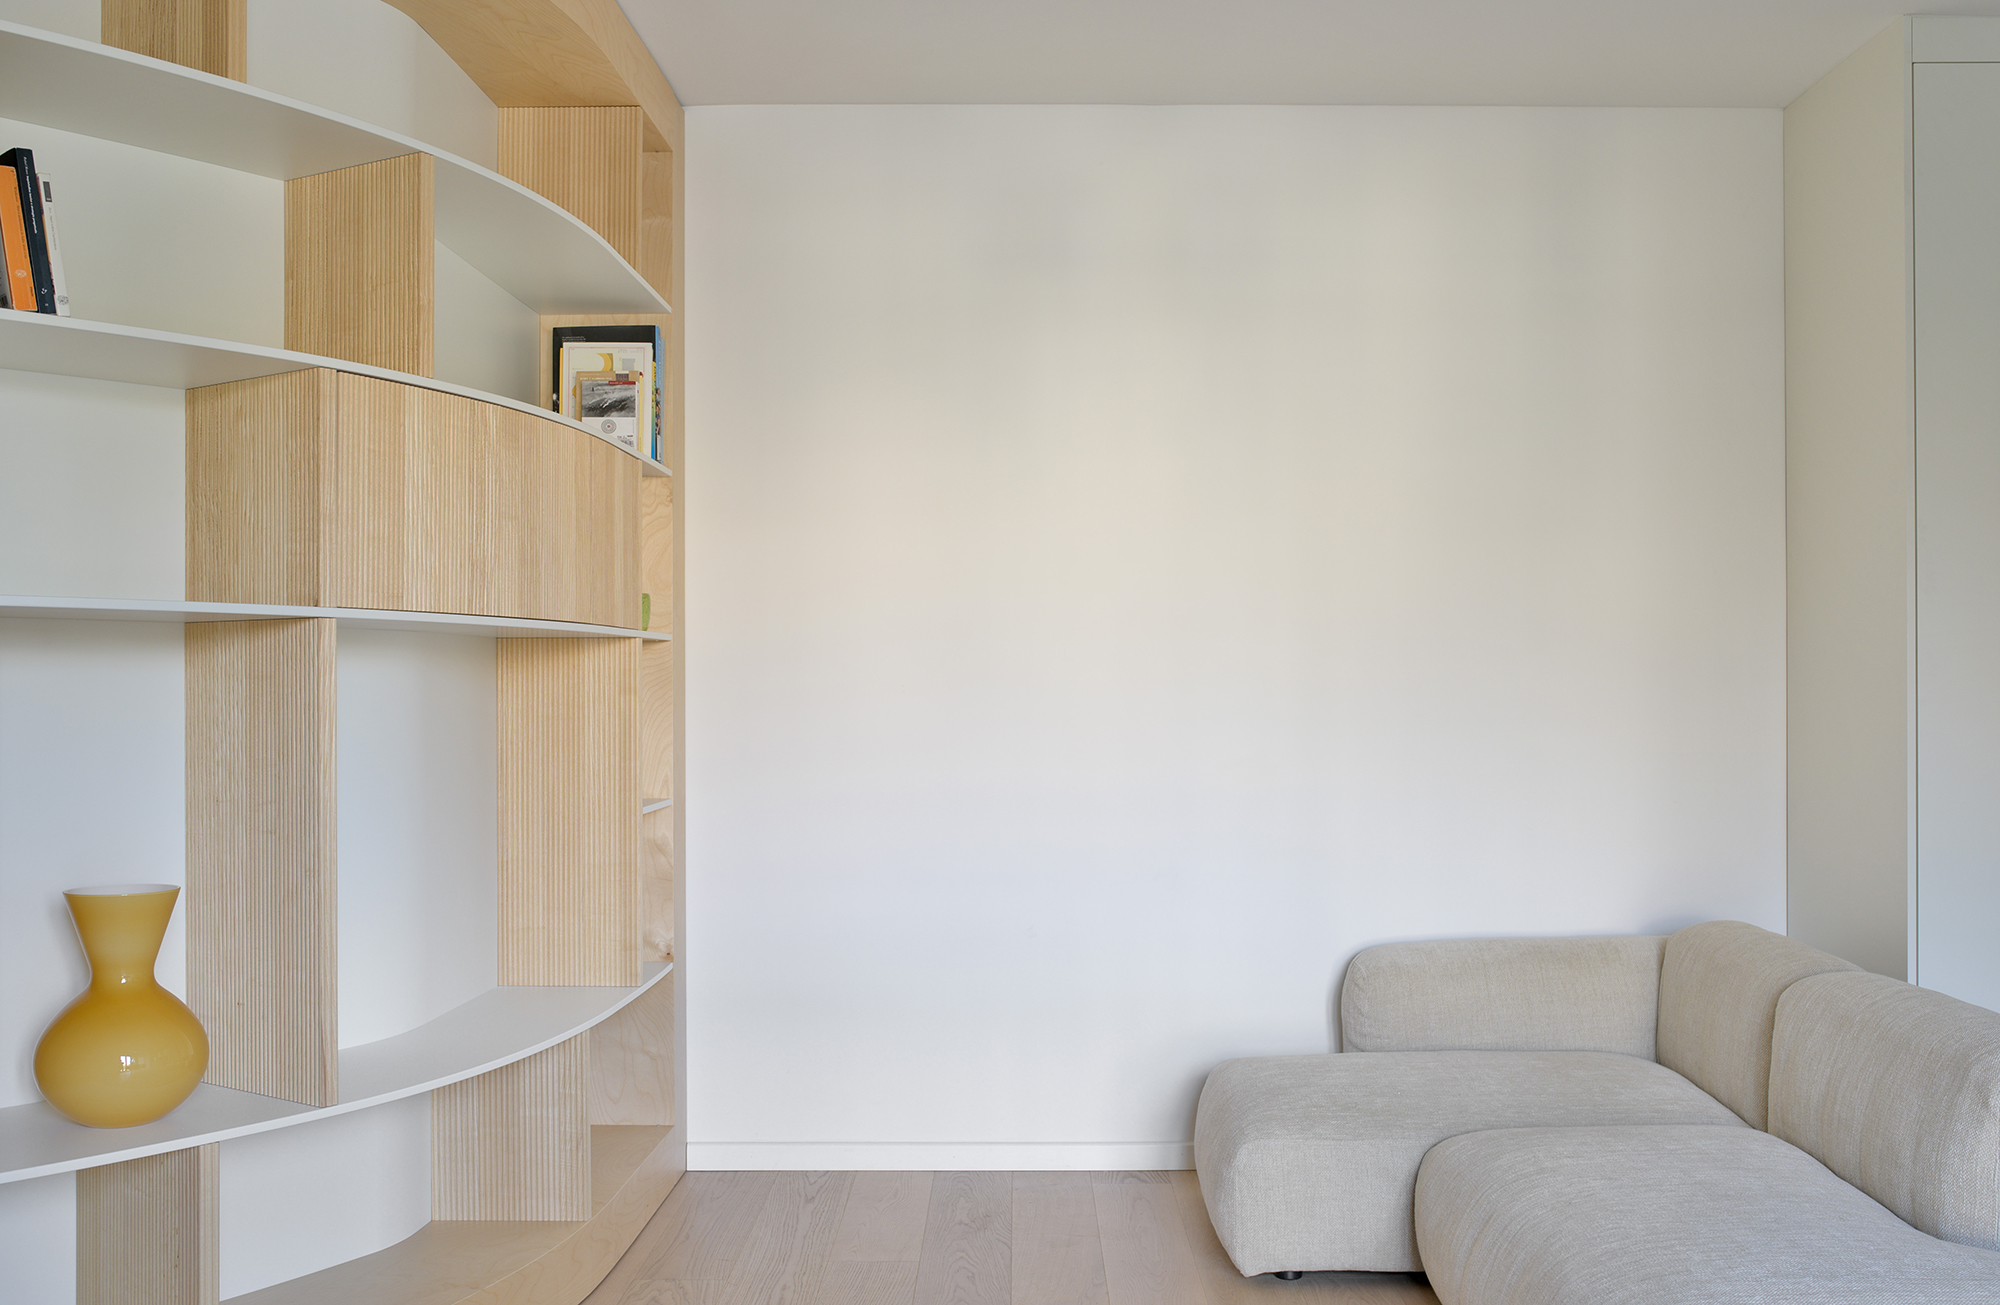 Apartment with a Library - Gessato